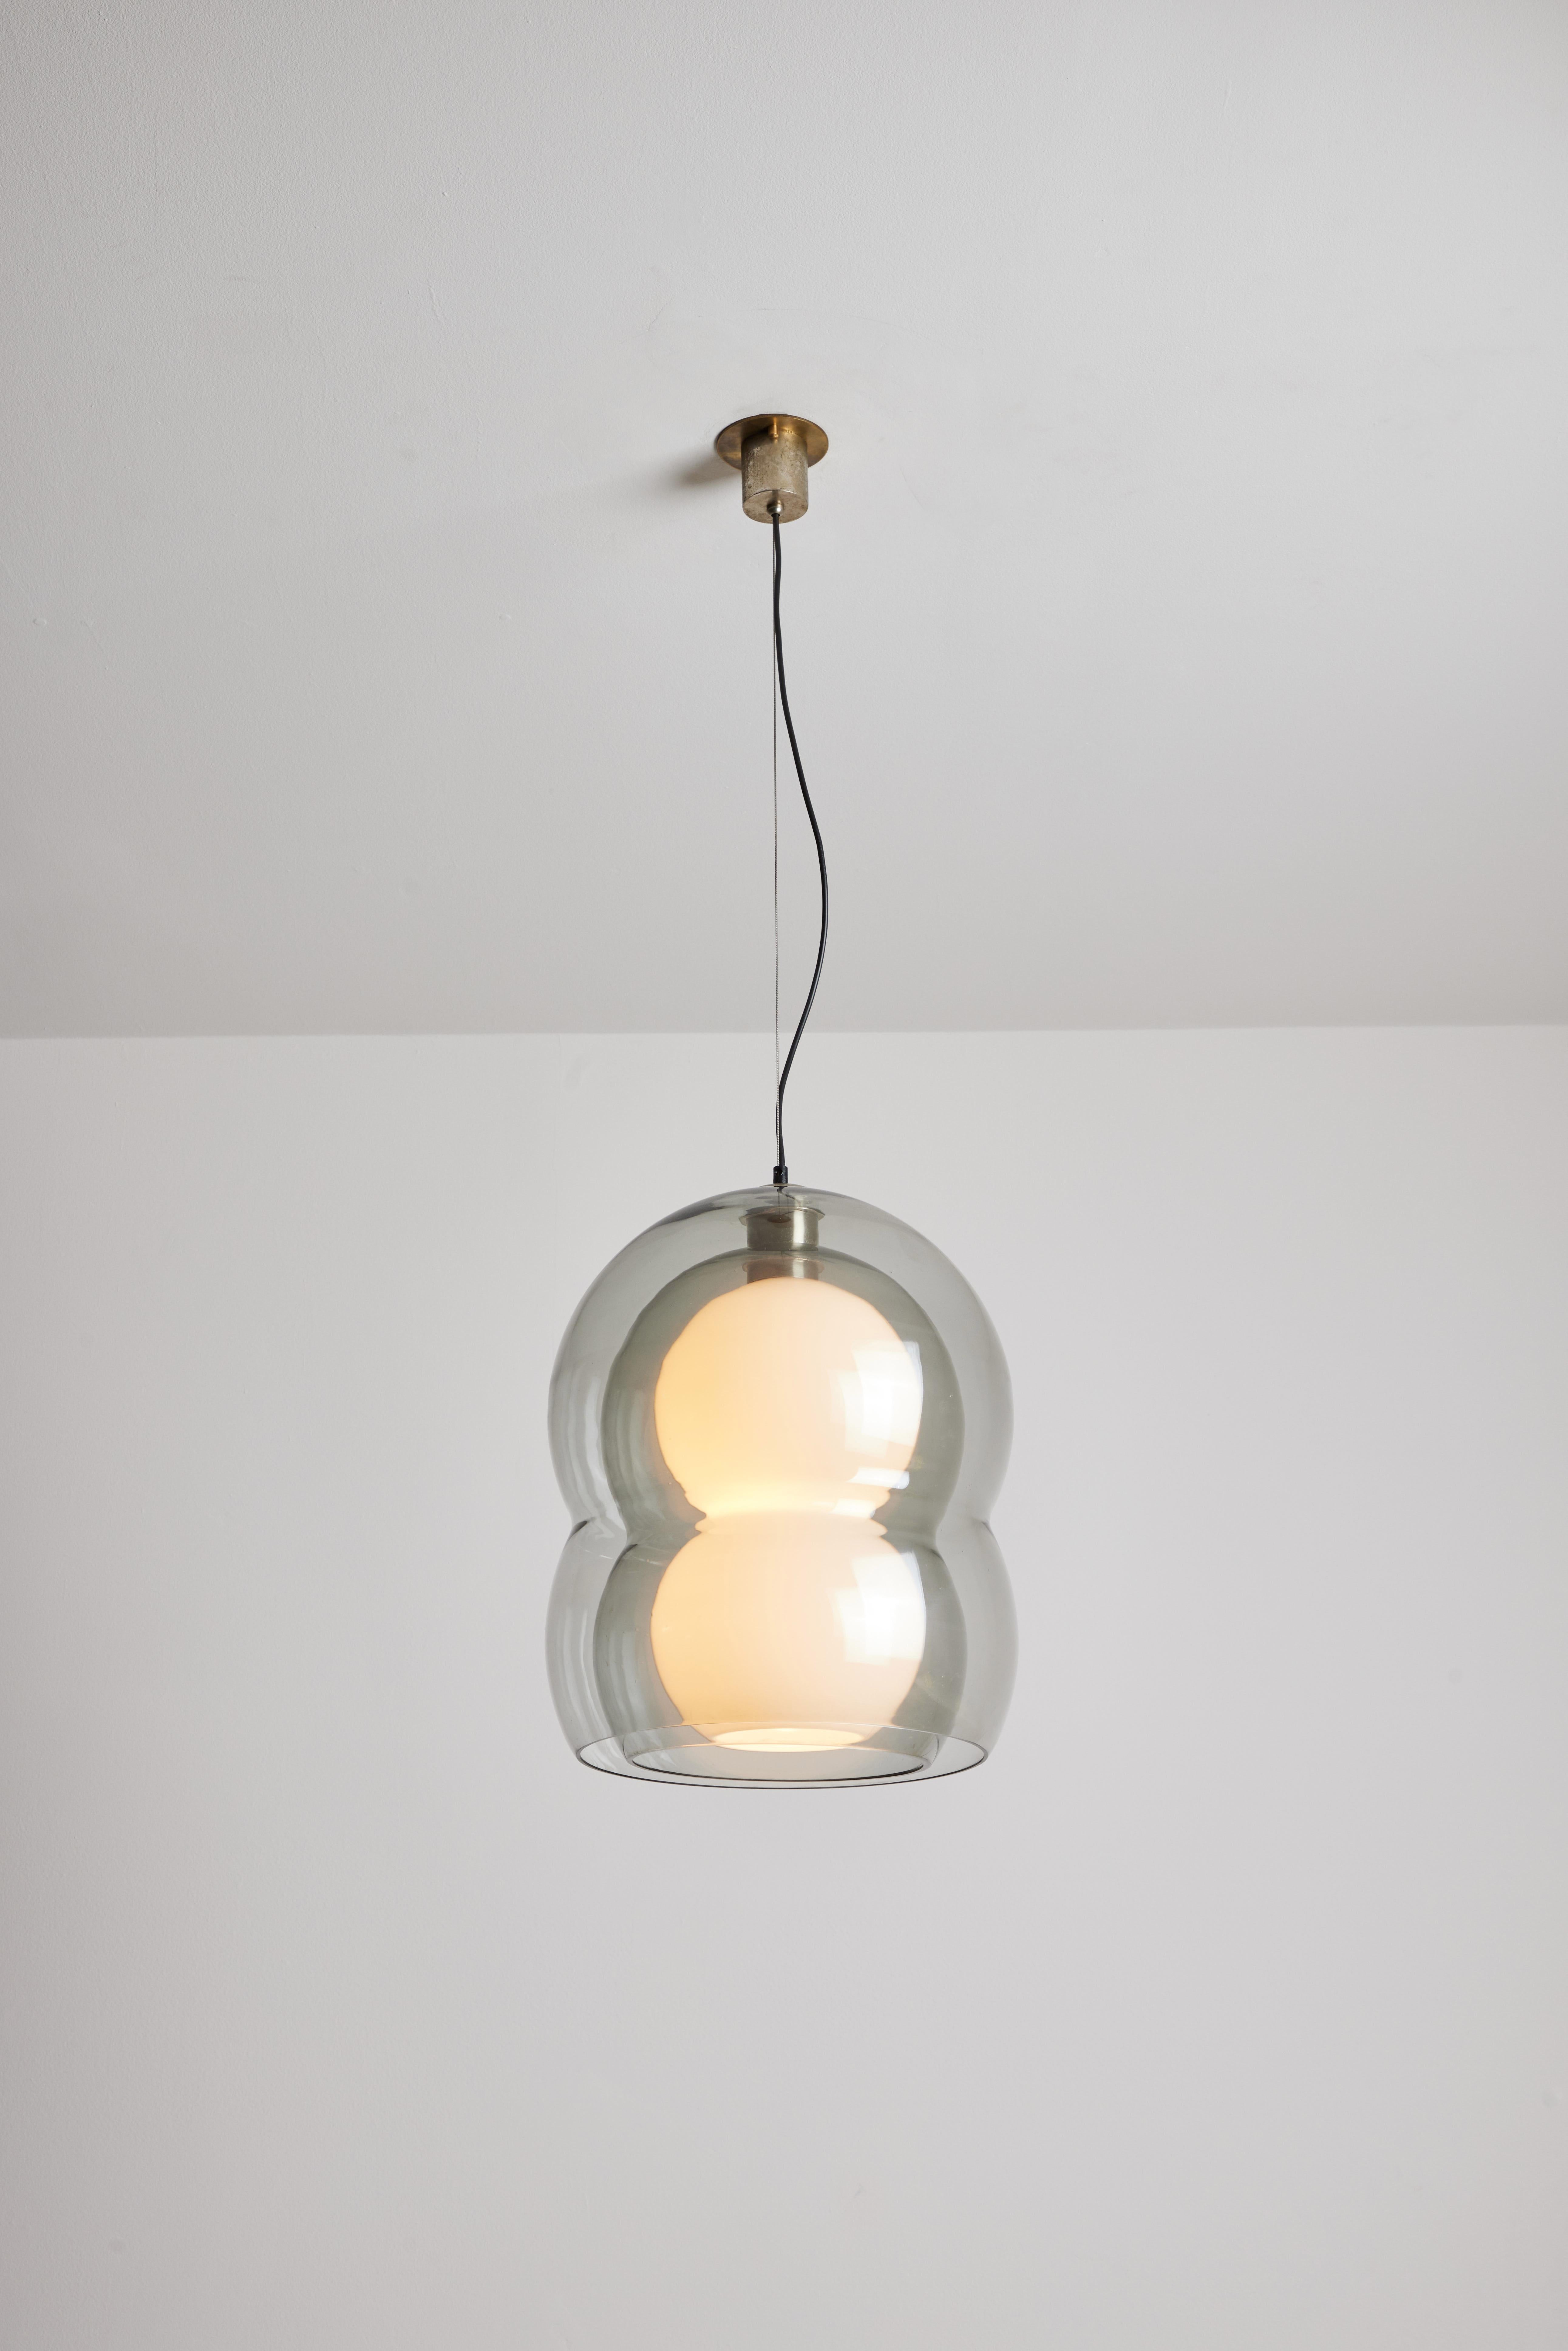 Two pendants by Carlo Nason for Mazzega. Designed and manufactured in Italy, circa 1970s. Glass, brass, nickel. Original canopy, custom brass back plate. We recommend one E27 75w maximum bulb per fixture. Bulbs provided as a one time courtesy.